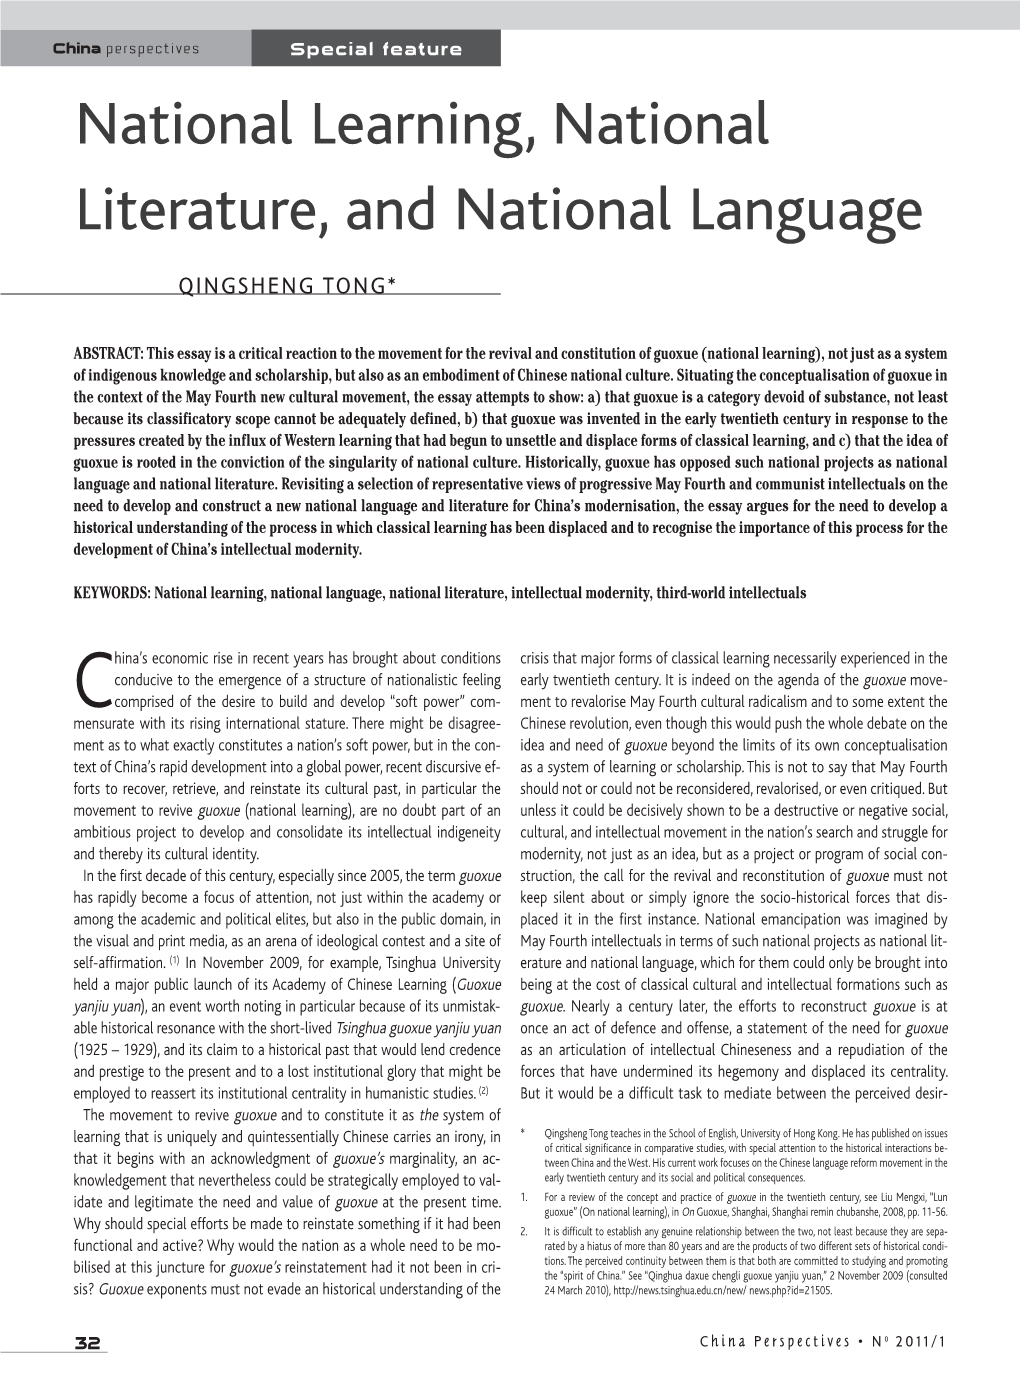 National Learning, National Literature, and National Language